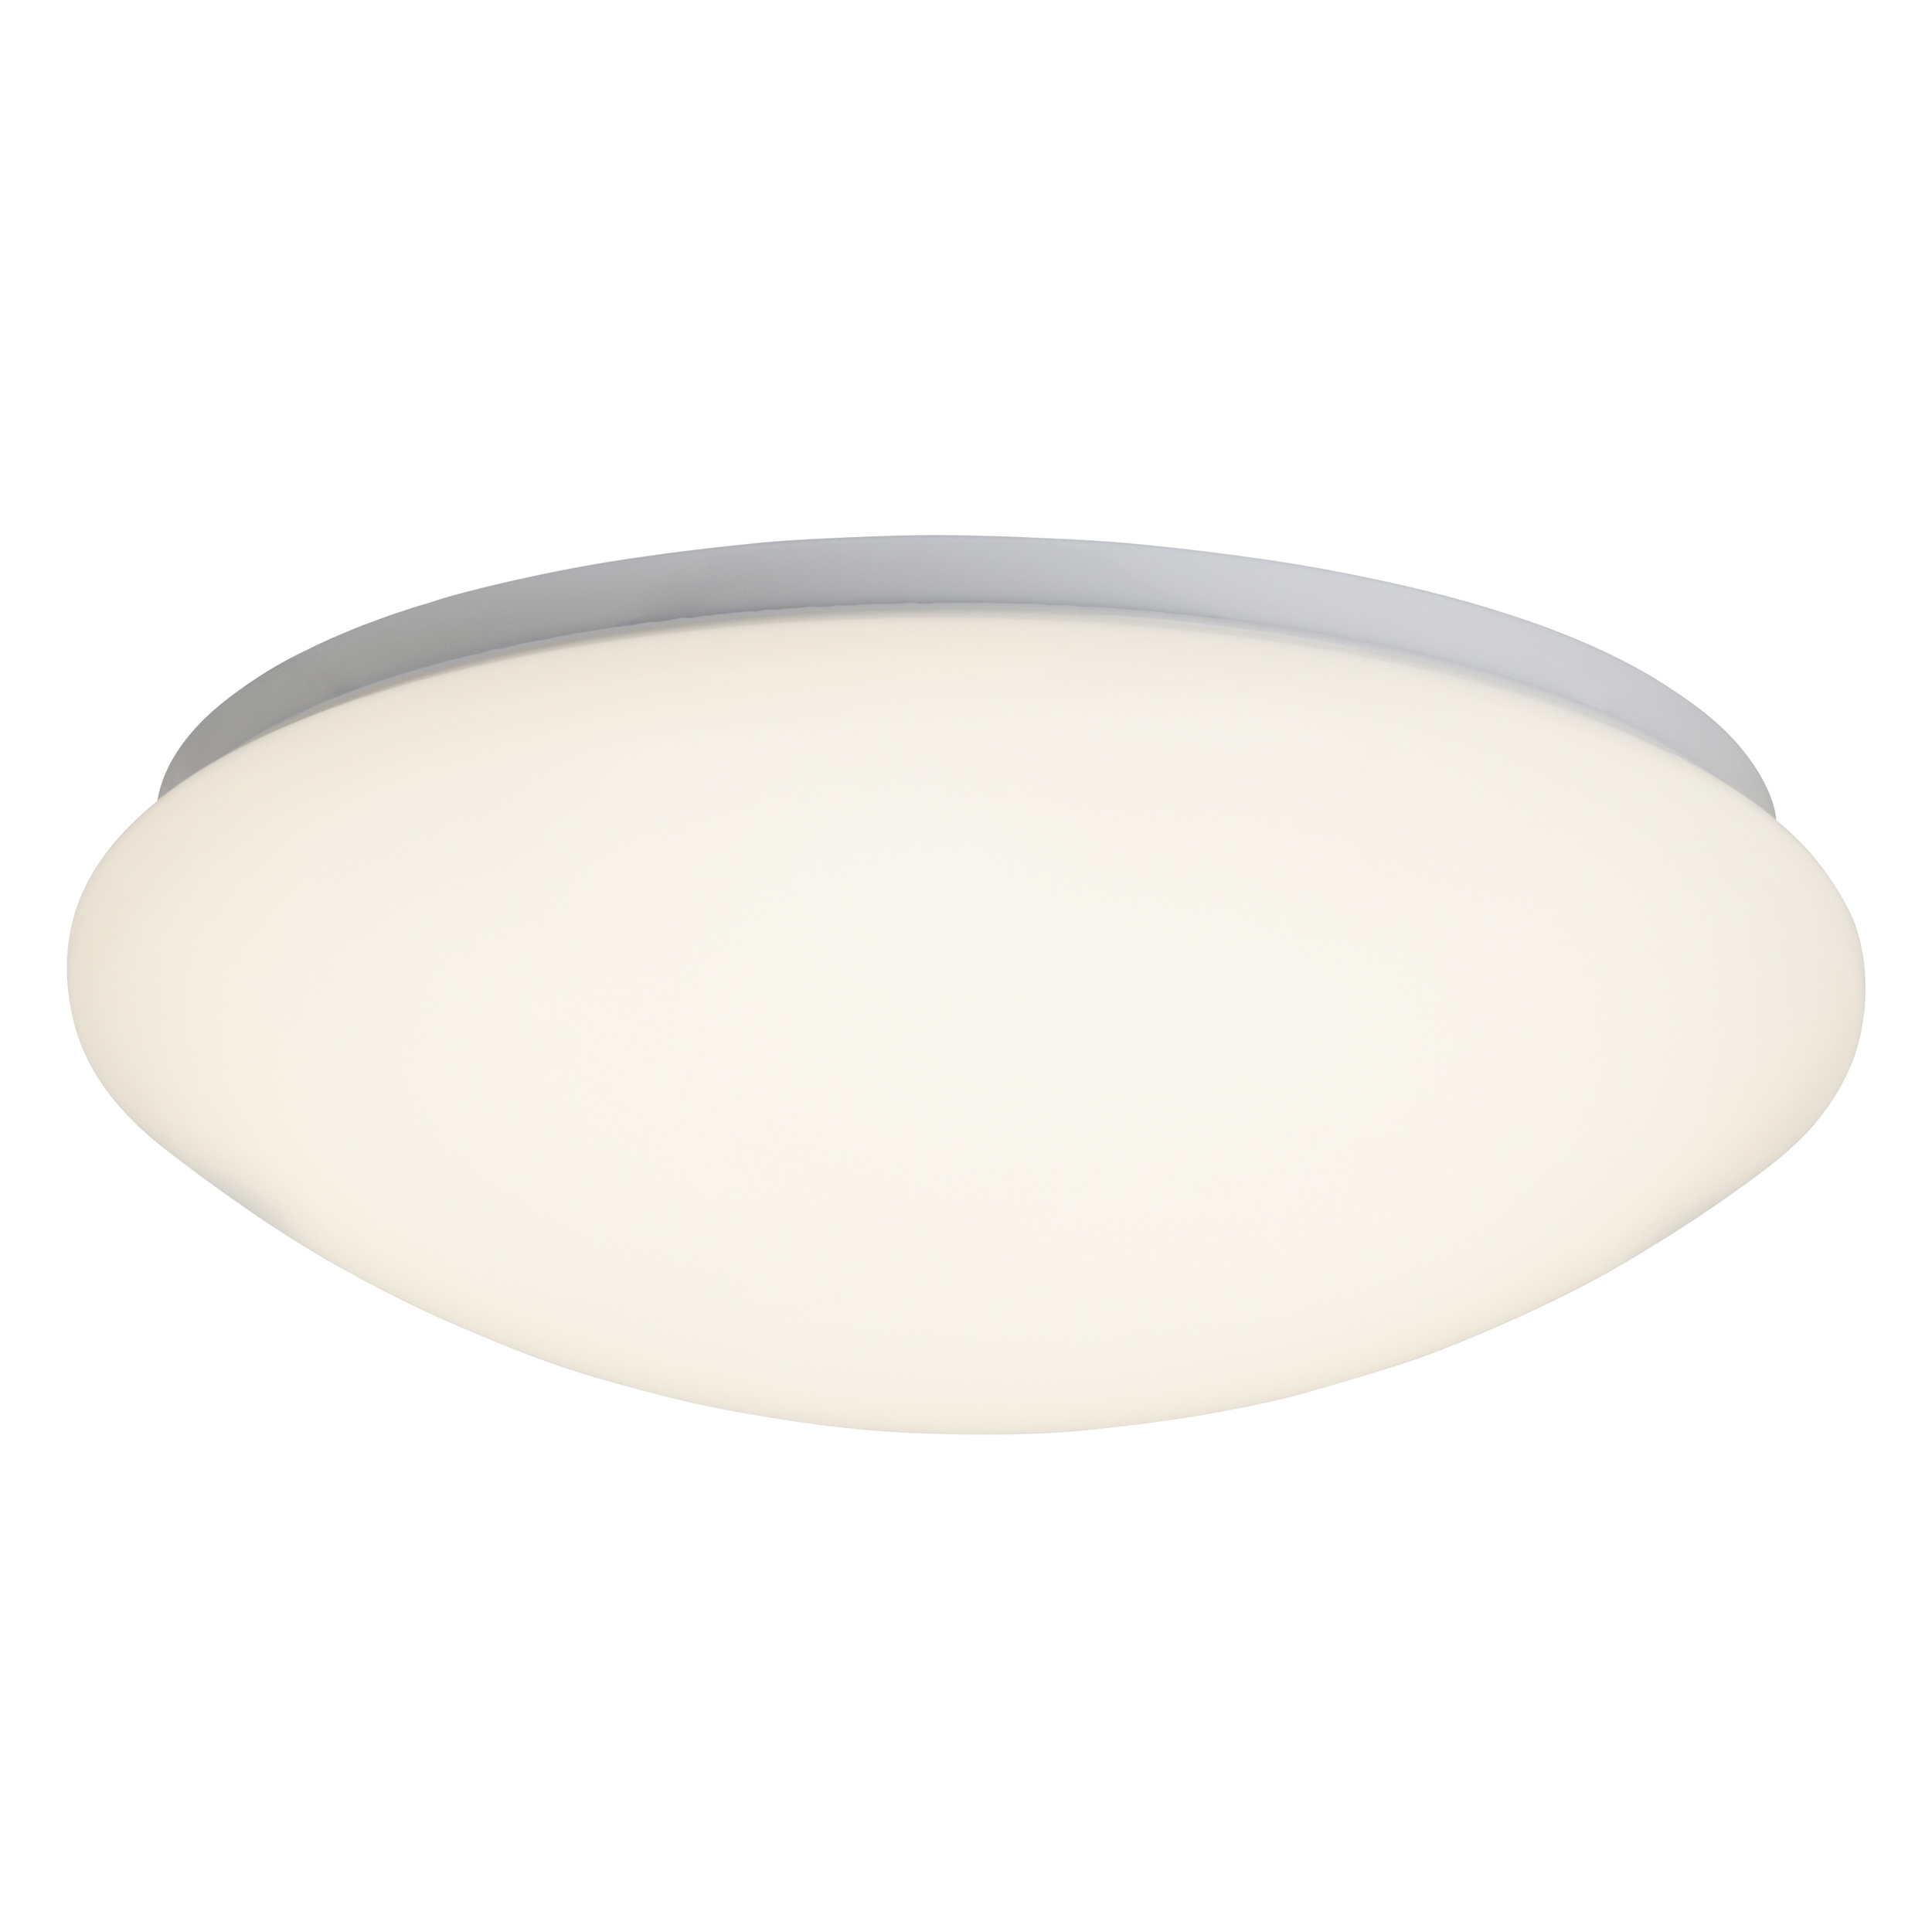 Fakir LED wall and ceiling light 30cm white/warm white